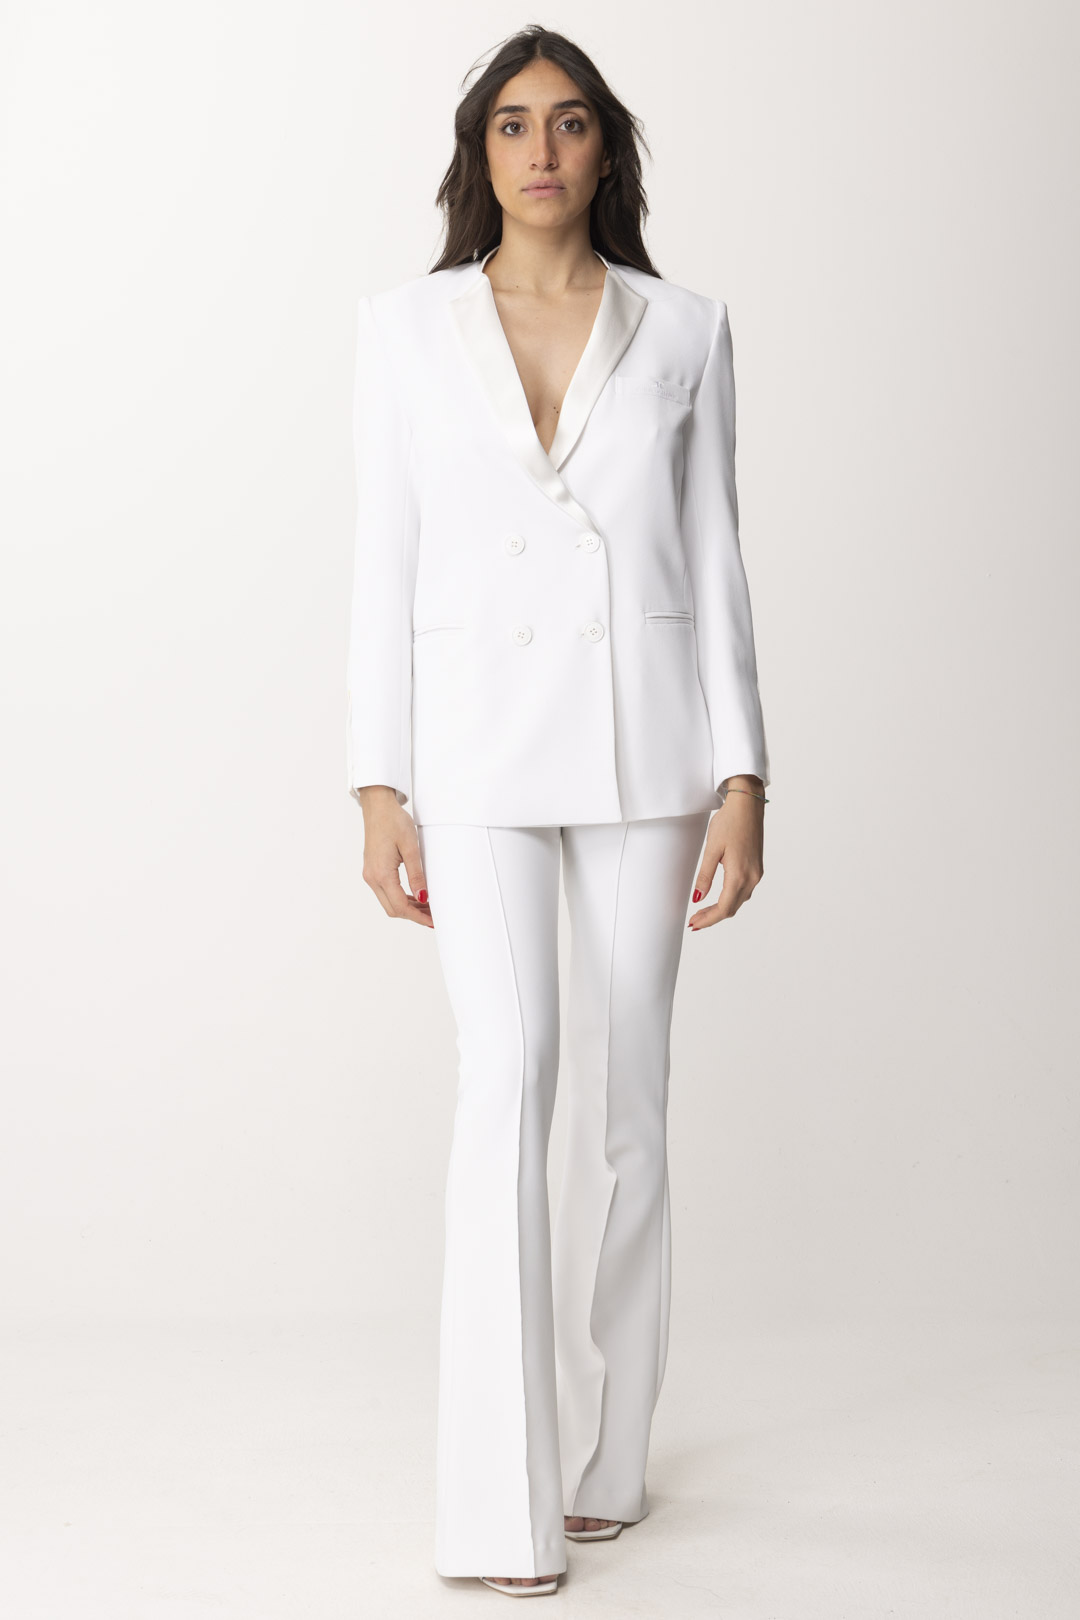 Preview: Elisabetta Franchi Double-Breasted Jacket with Satin Lapels Avorio